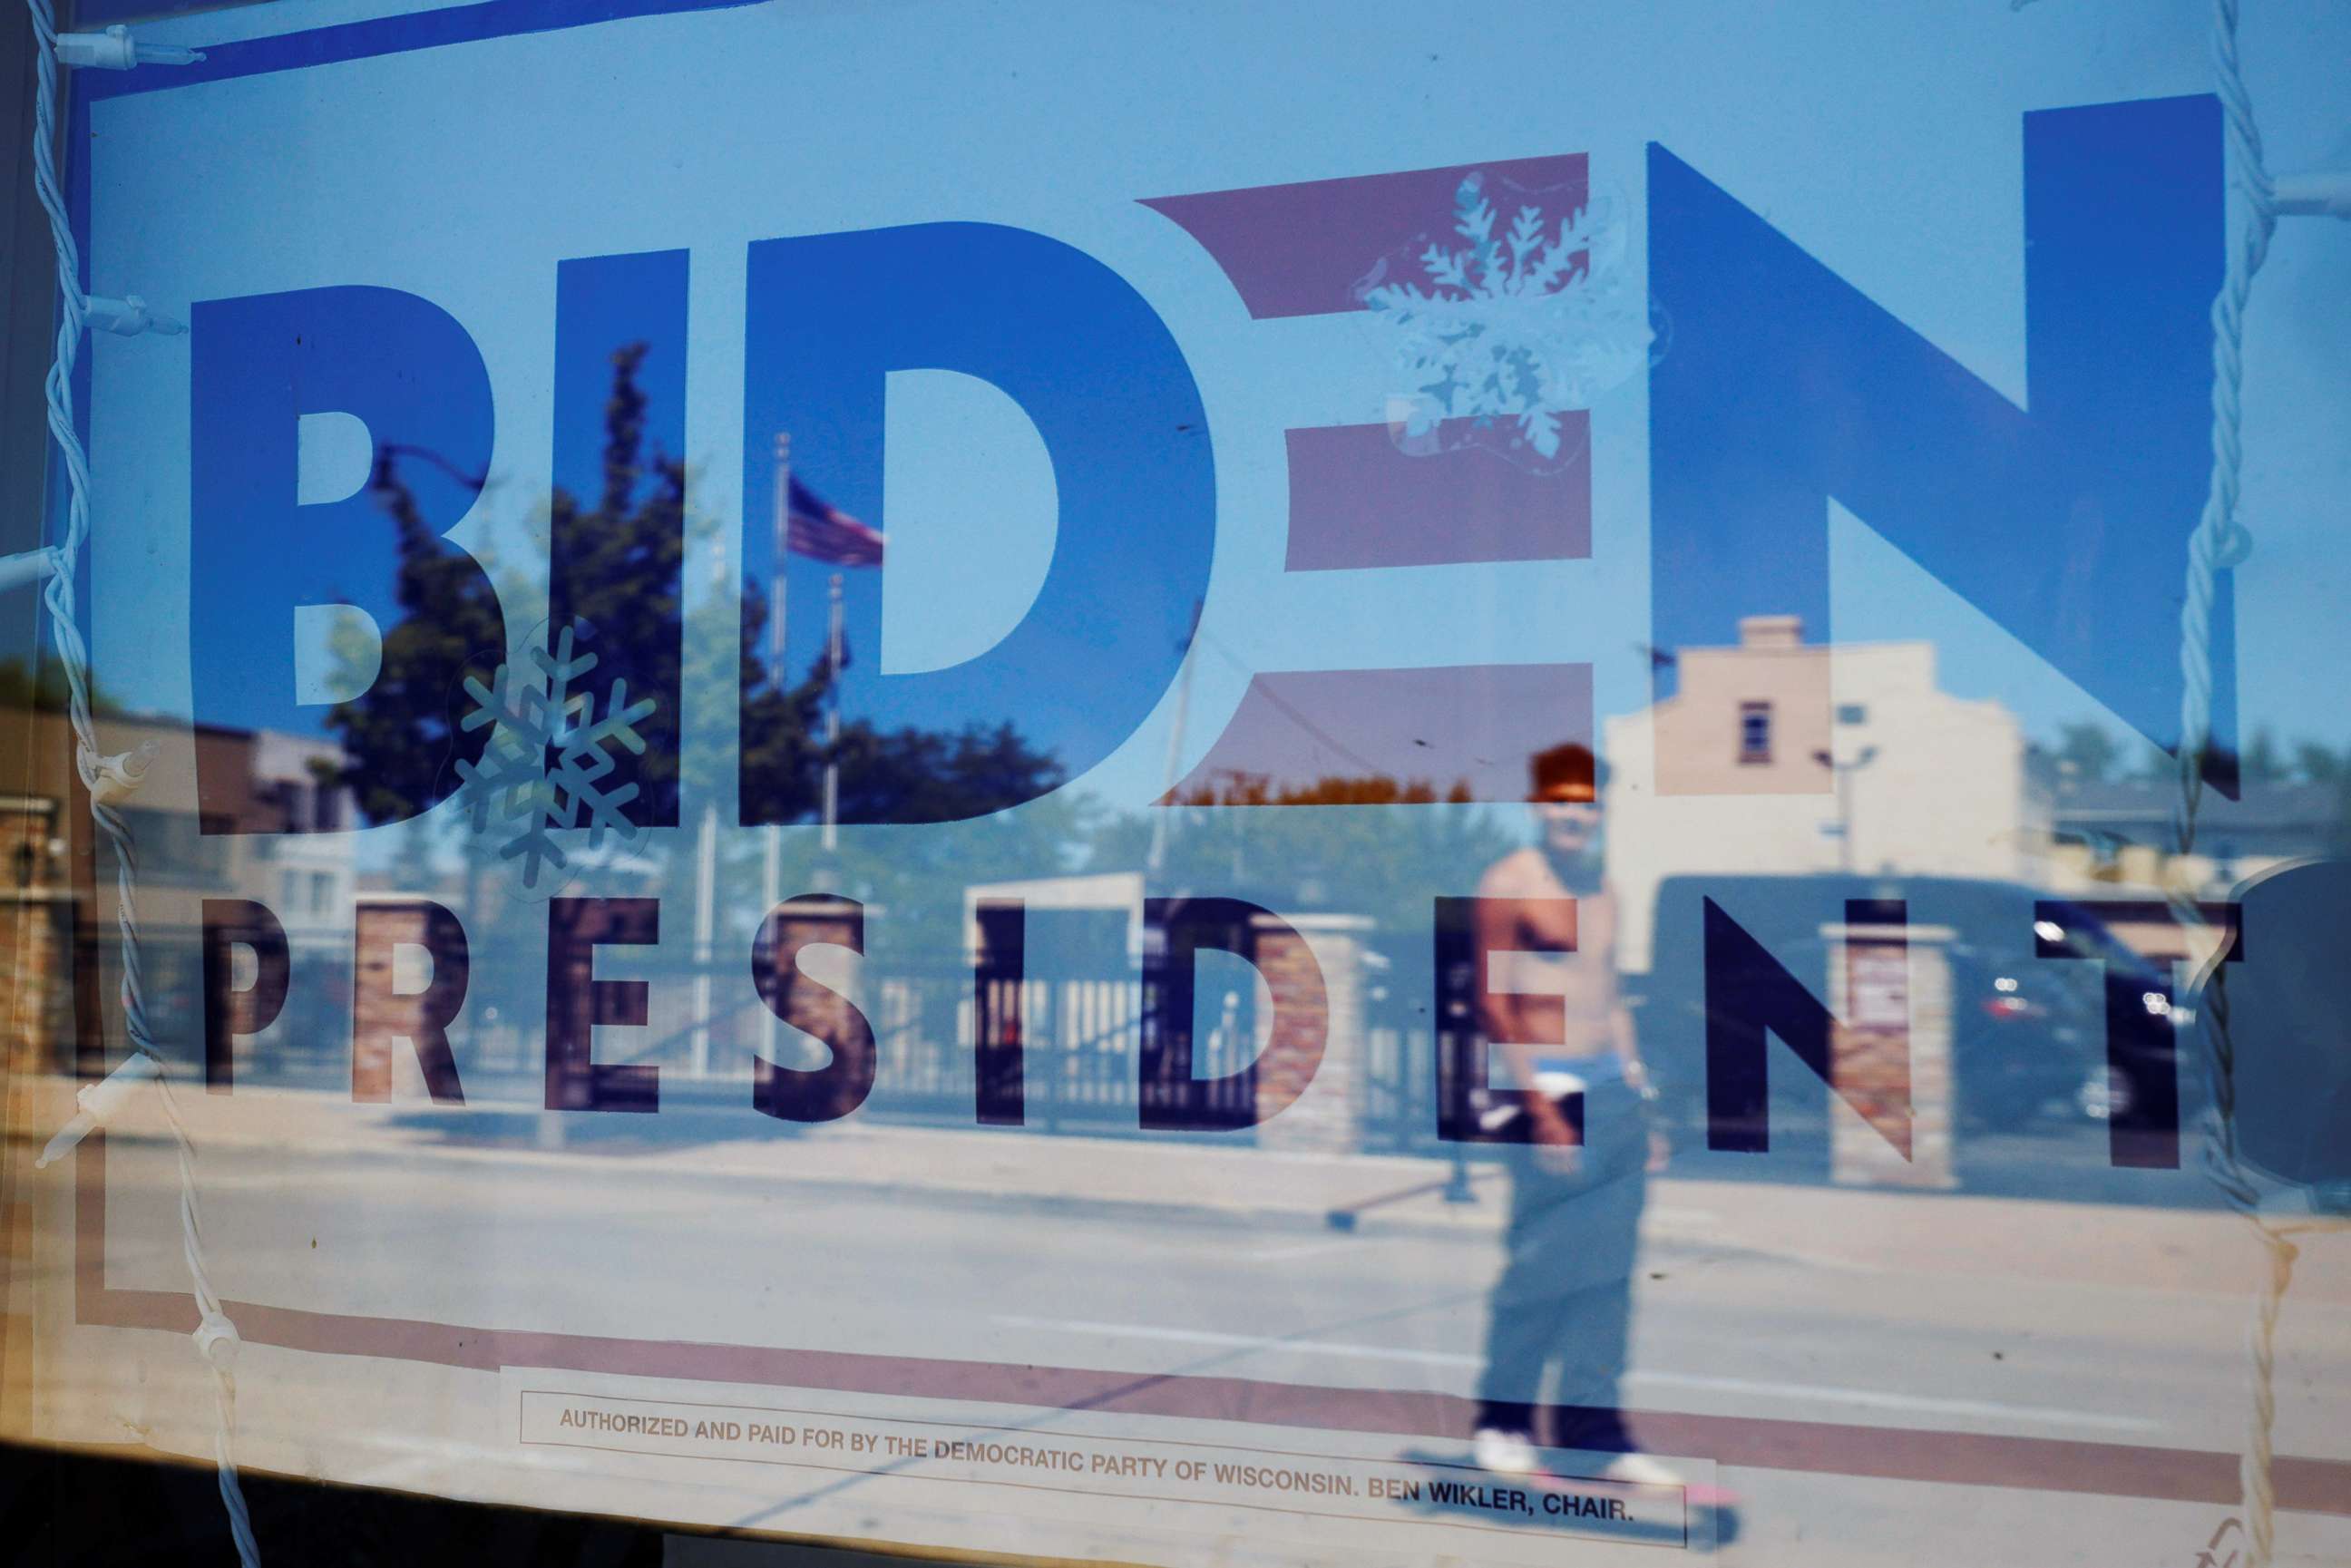 PHOTO: A sign supporting Democratic presidential nominee Joe Biden hangs in the window of the Racine County Democratic Party office, during the largely virtual Democratic National Convention (DNC), in Racine, Wis., Aug. 19, 2020.